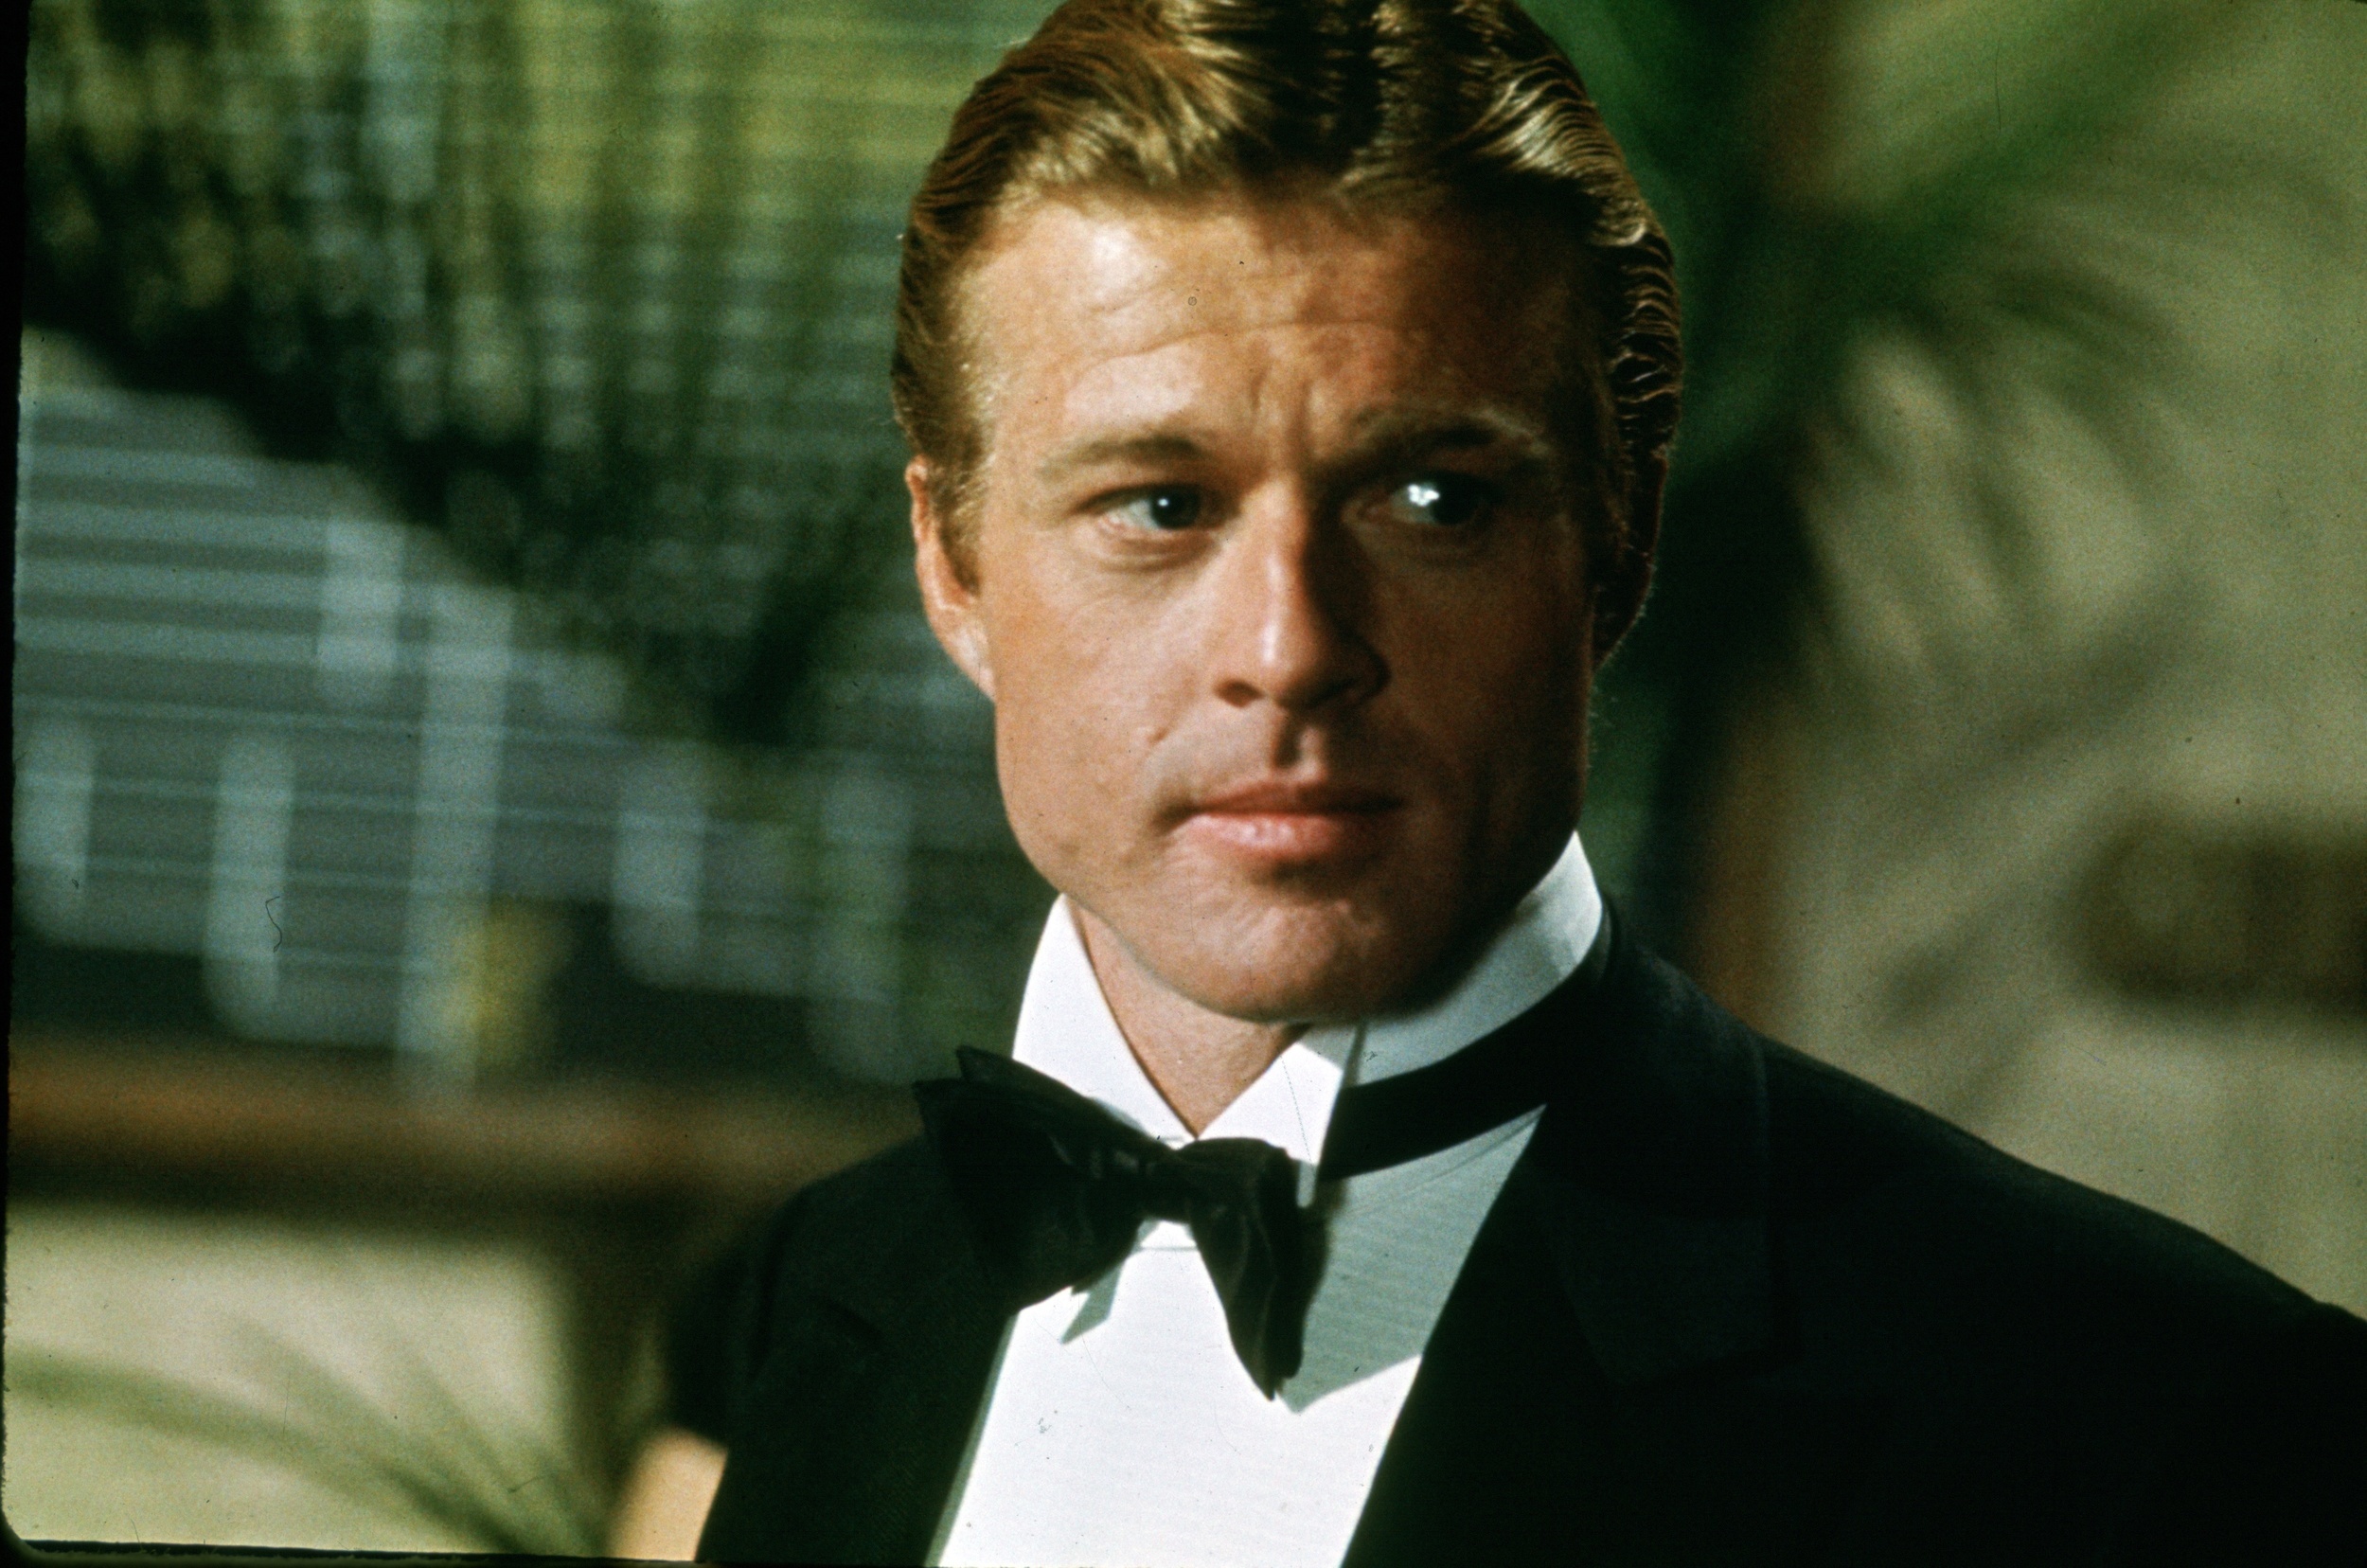 <p>Redford won an Oscar for Best Director for “Ordinary People,” but he never won an Oscar for acting. In fact, he only has <em>one</em> nomination for acting. That nomination came for “The Sting.” Redford has said he’s retired from acting, though since then he has made a cameo in a Marvel movie and done a voice role. Still, it’s likely “The Sting” will go down as the iconic actor’s only nomination for acting.</p><p><a href='https://www.msn.com/en-us/community/channel/vid-cj9pqbr0vn9in2b6ddcd8sfgpfq6x6utp44fssrv6mc2gtybw0us'>Did you enjoy this slideshow? Follow us on MSN to see more of our exclusive entertainment content.</a></p>